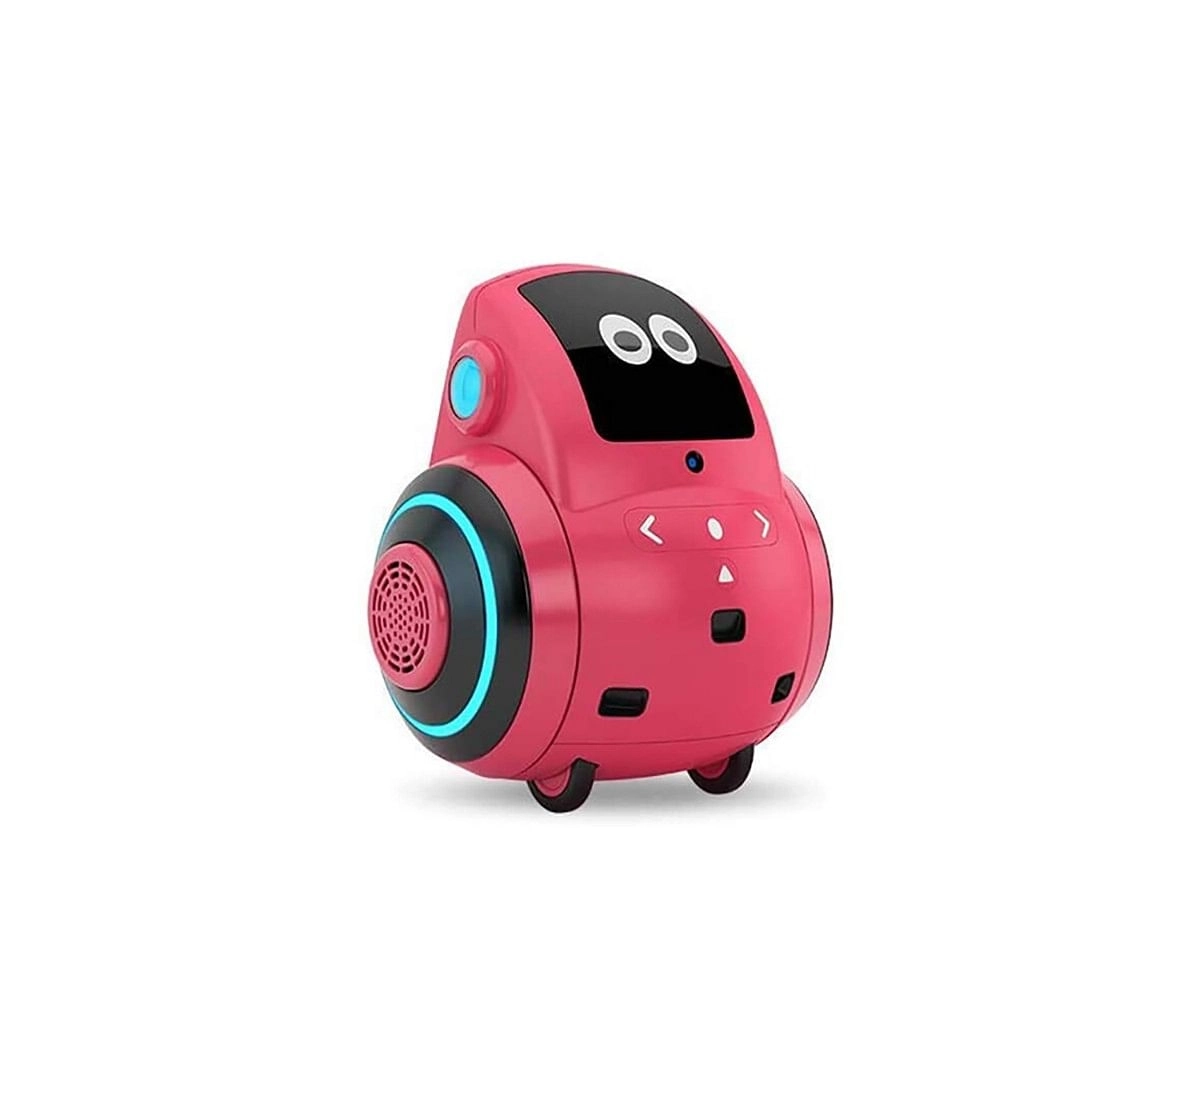 Miko 2 My Companion Robot - Red Robotics for Kids age 5Y+ (Red)